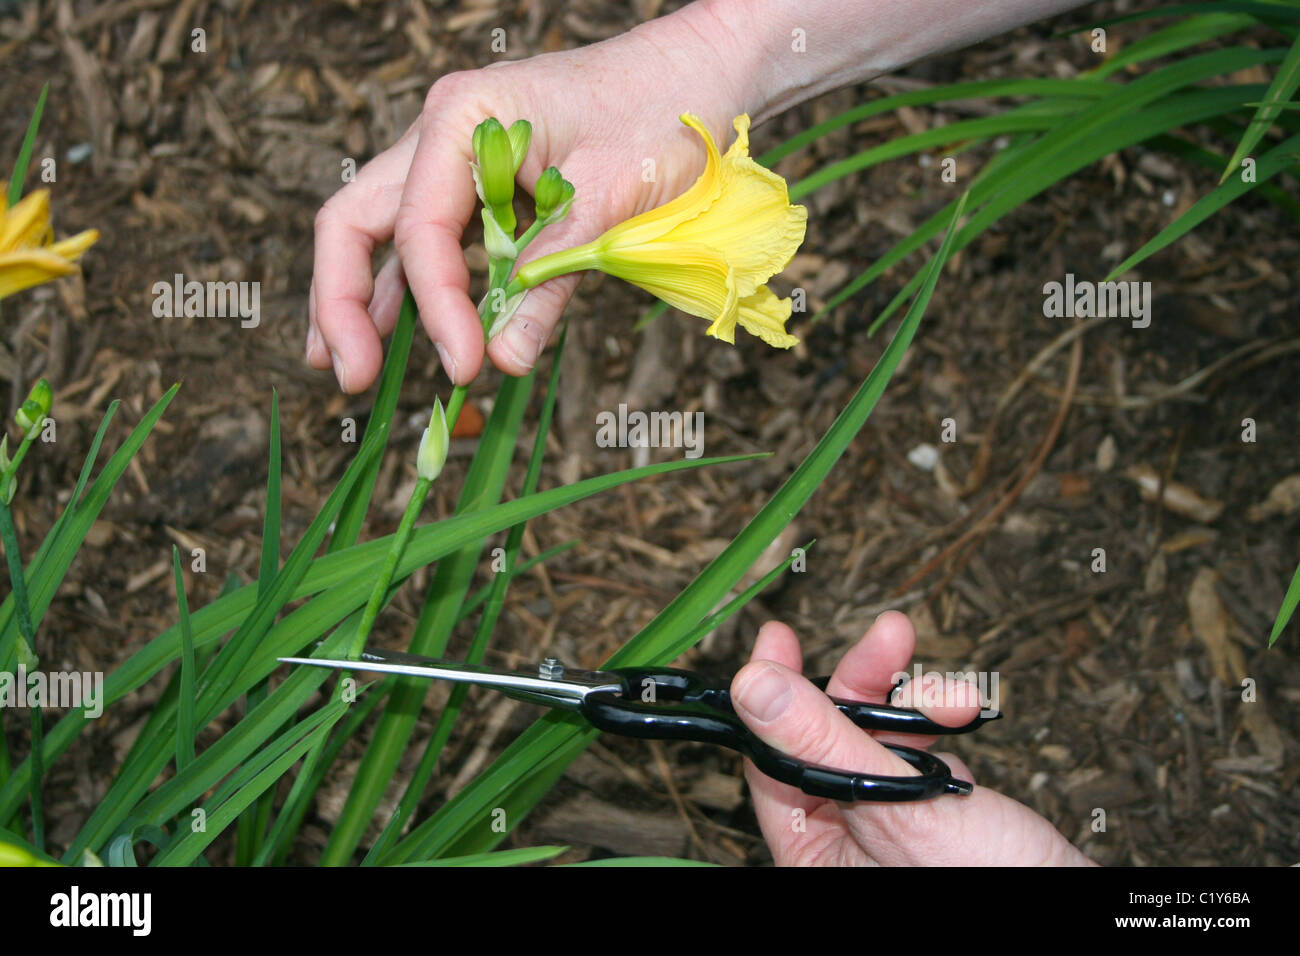 Person cutting Yellow Lily flower from garden USA Stock Photo